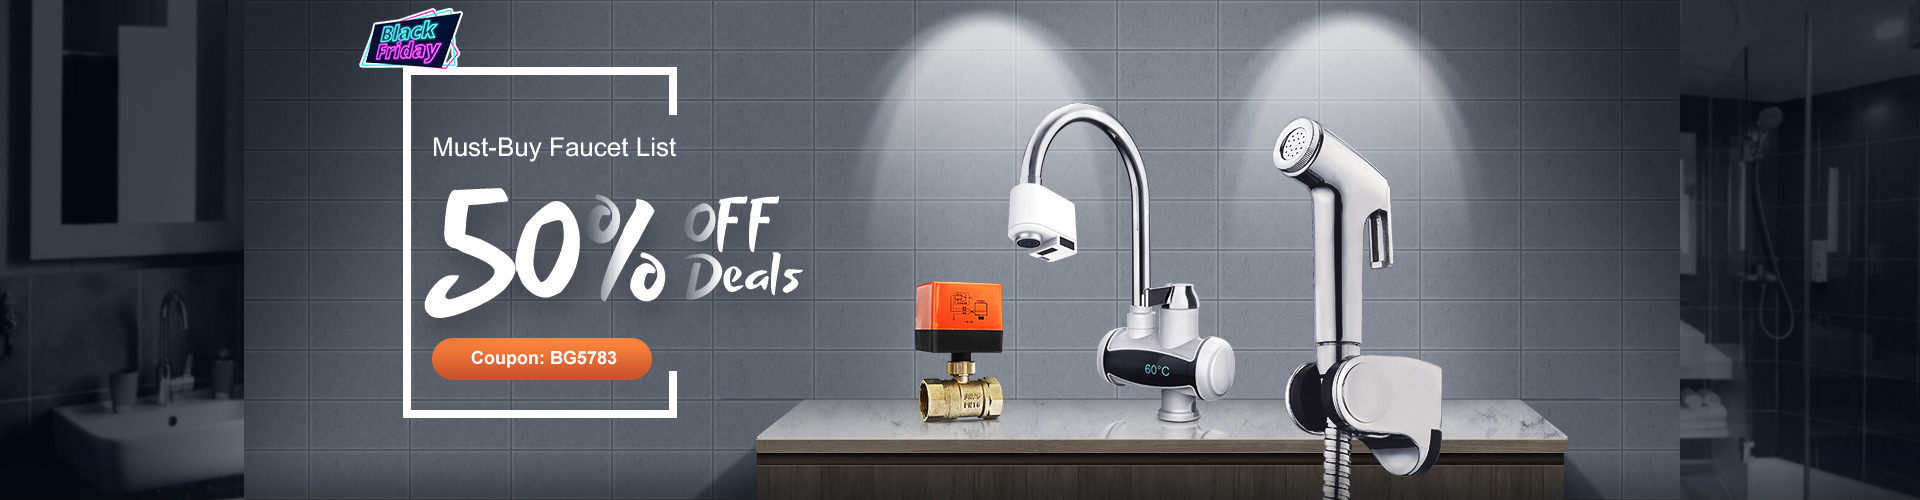 20% OFF for Faucet Promotion